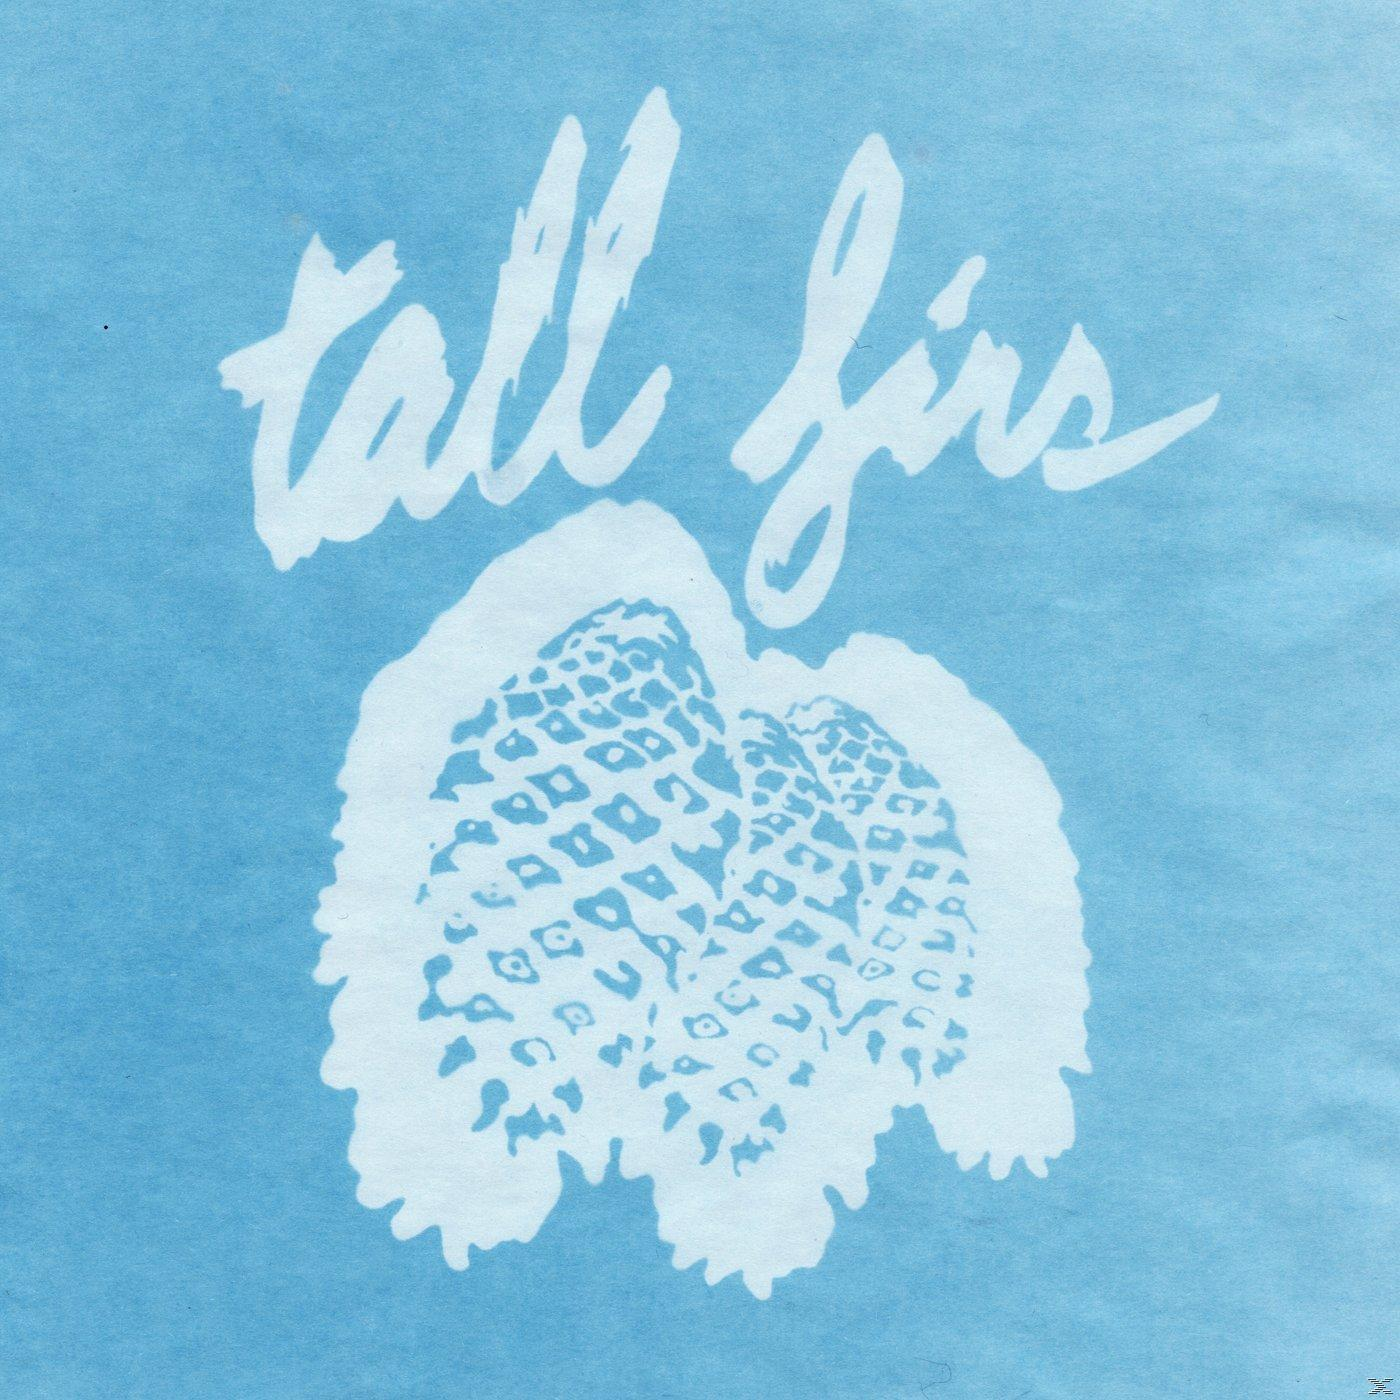 Tall Firs - Out It And It Of Into (CD) 